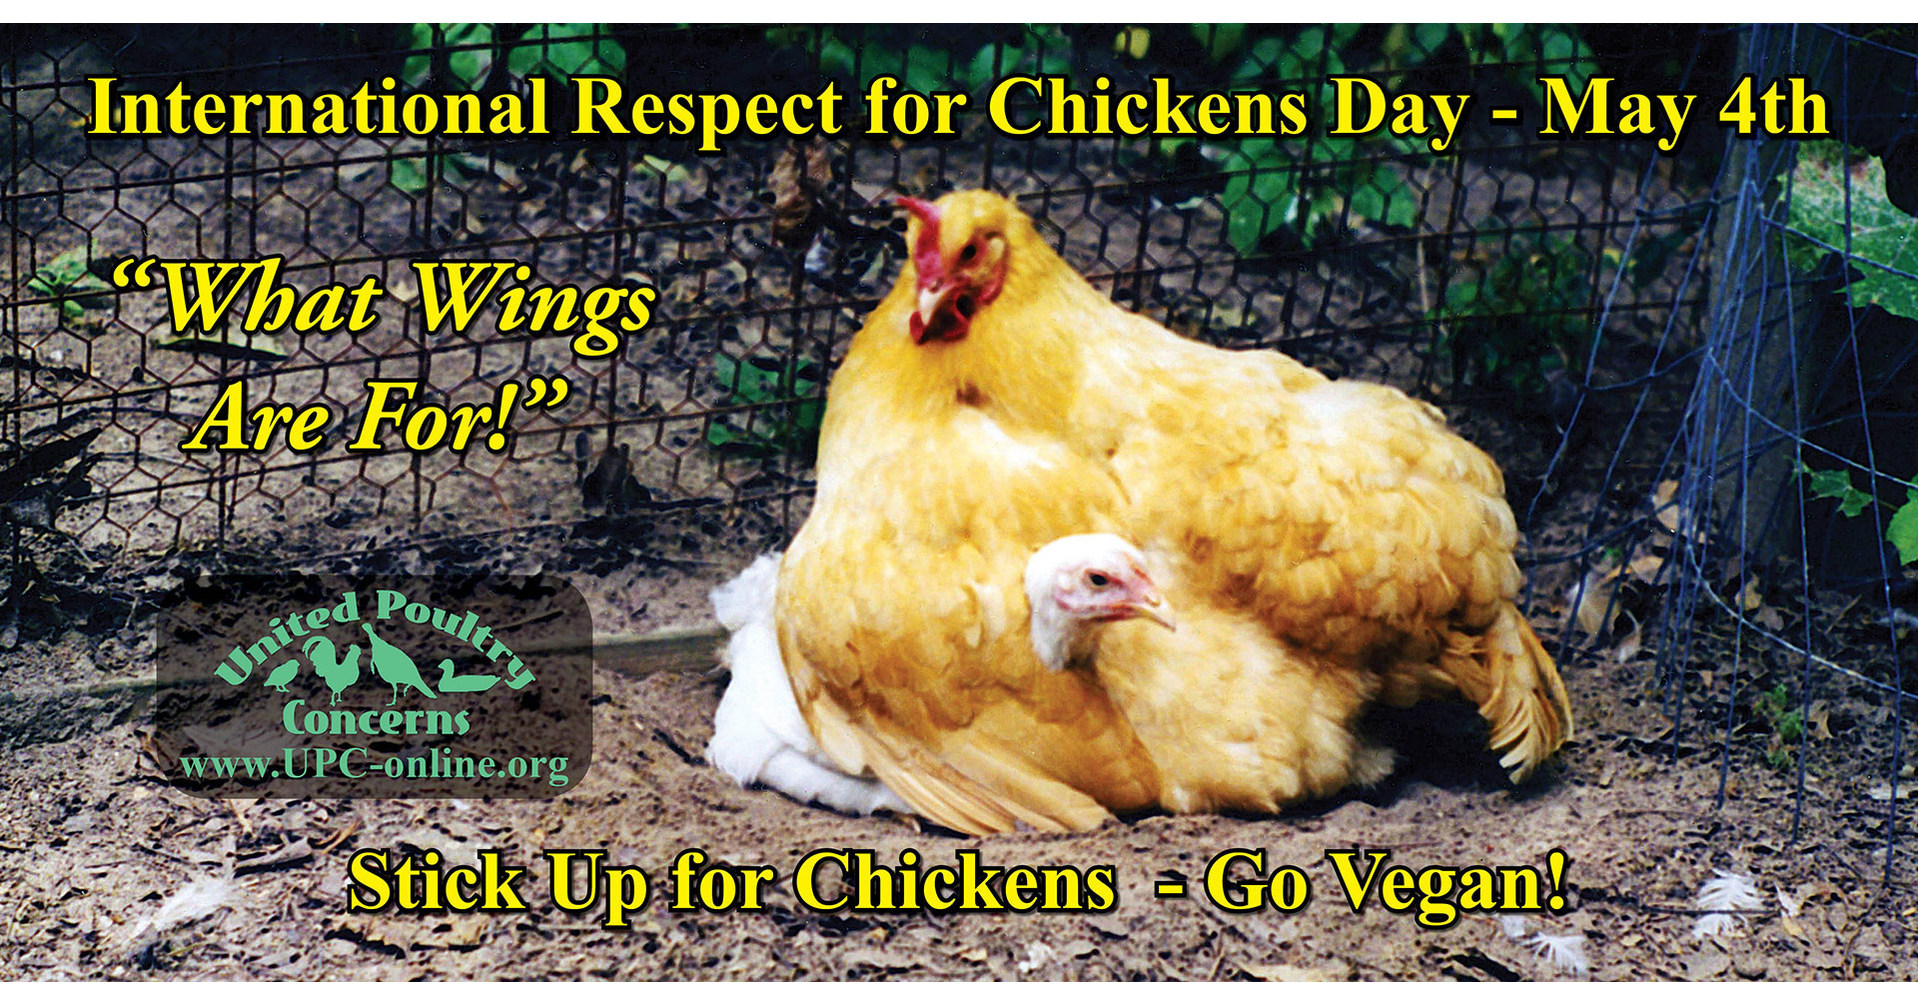 International Respect For Chickens Day Celebrates Compassion for Chickens